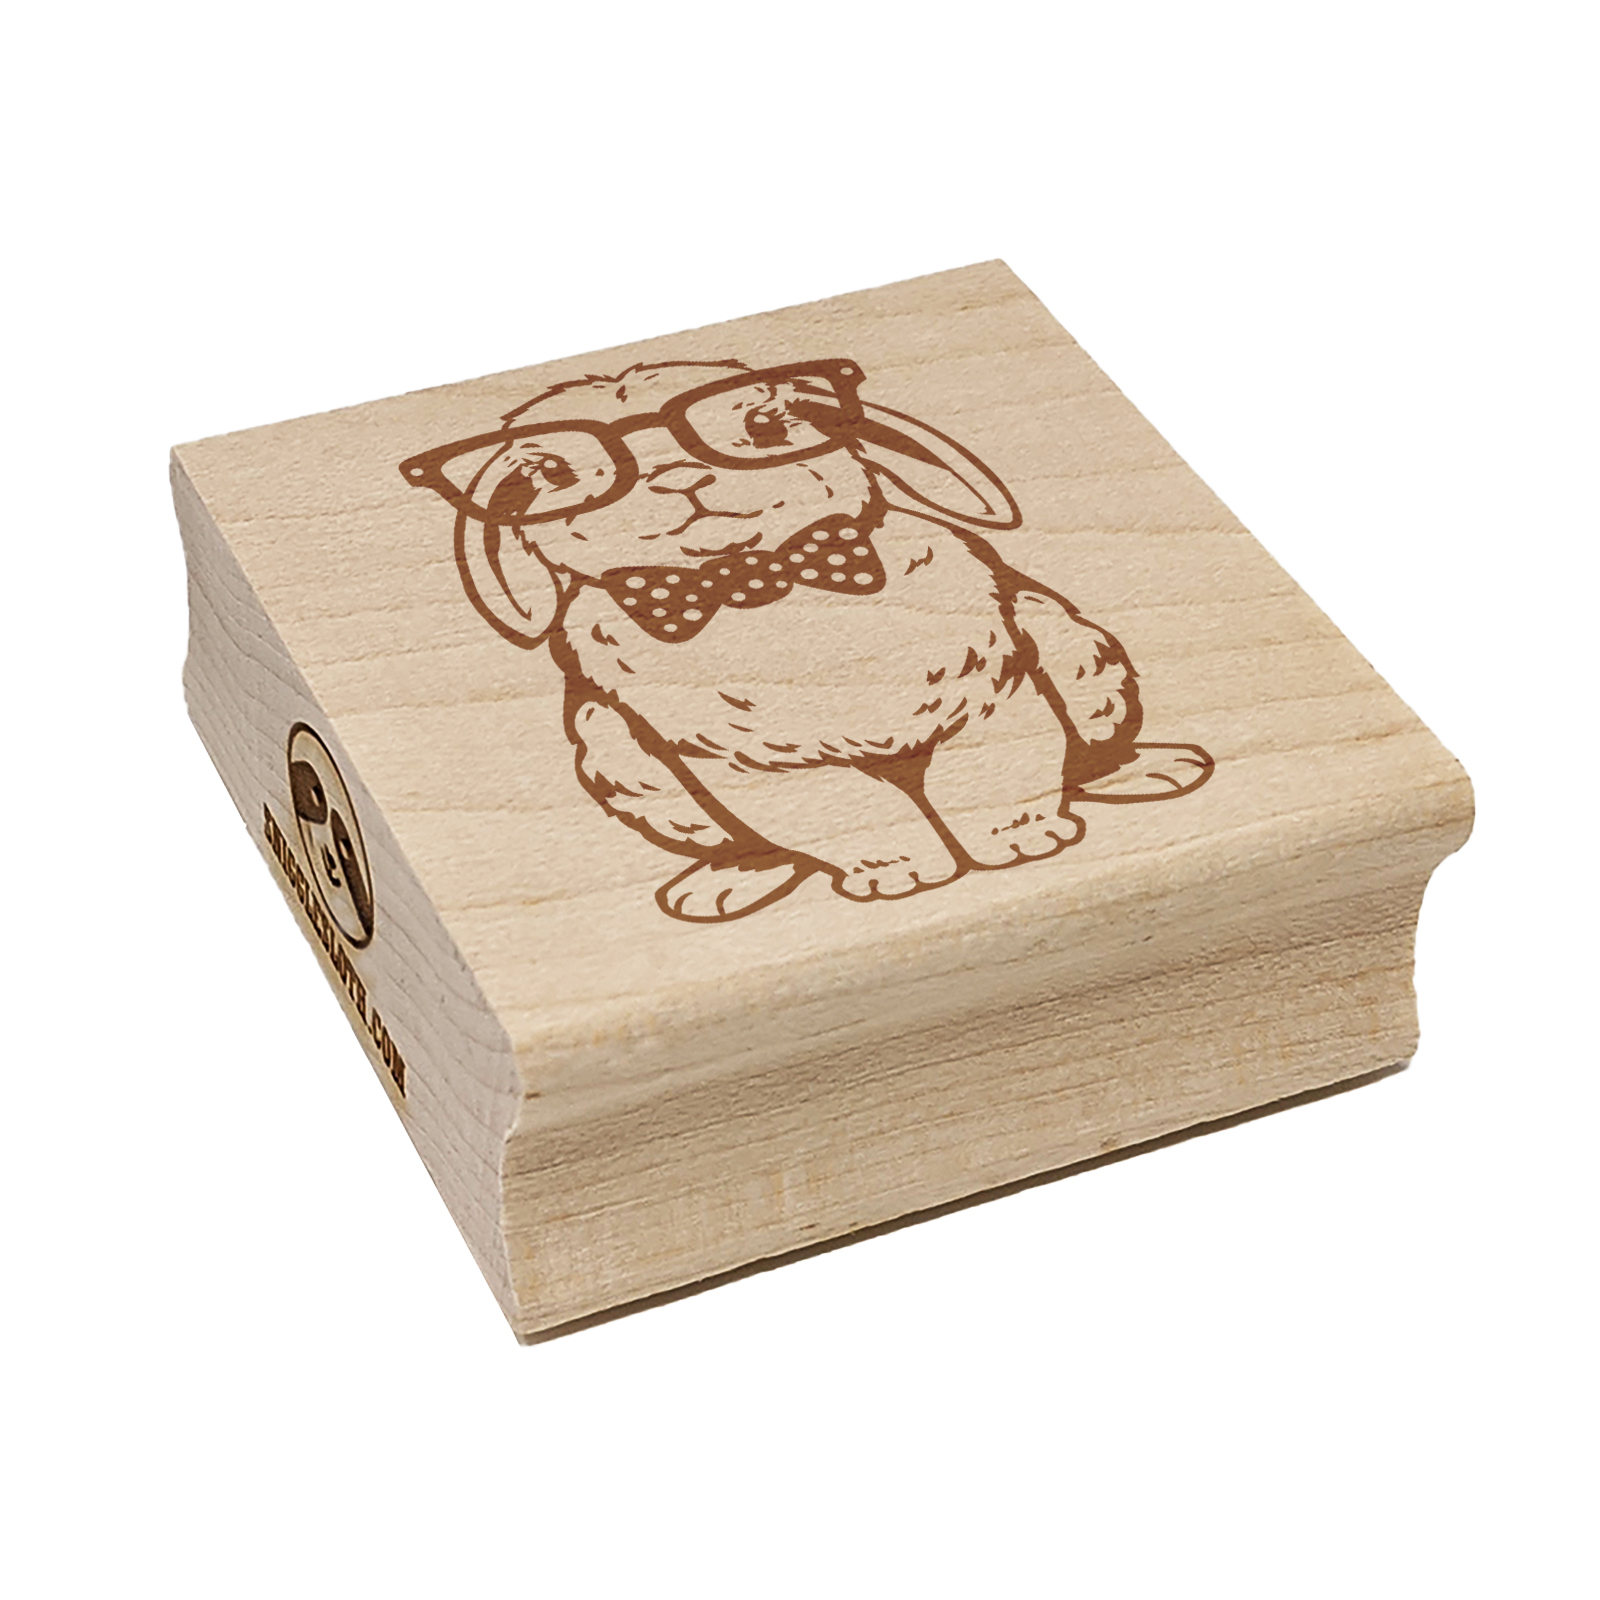 Cute Bunny Rabbit with Glasses and Bow Tie Square Rubber Stamp Stamping Scrapbooking Crafting - Medium 1.75in - image 1 of 7